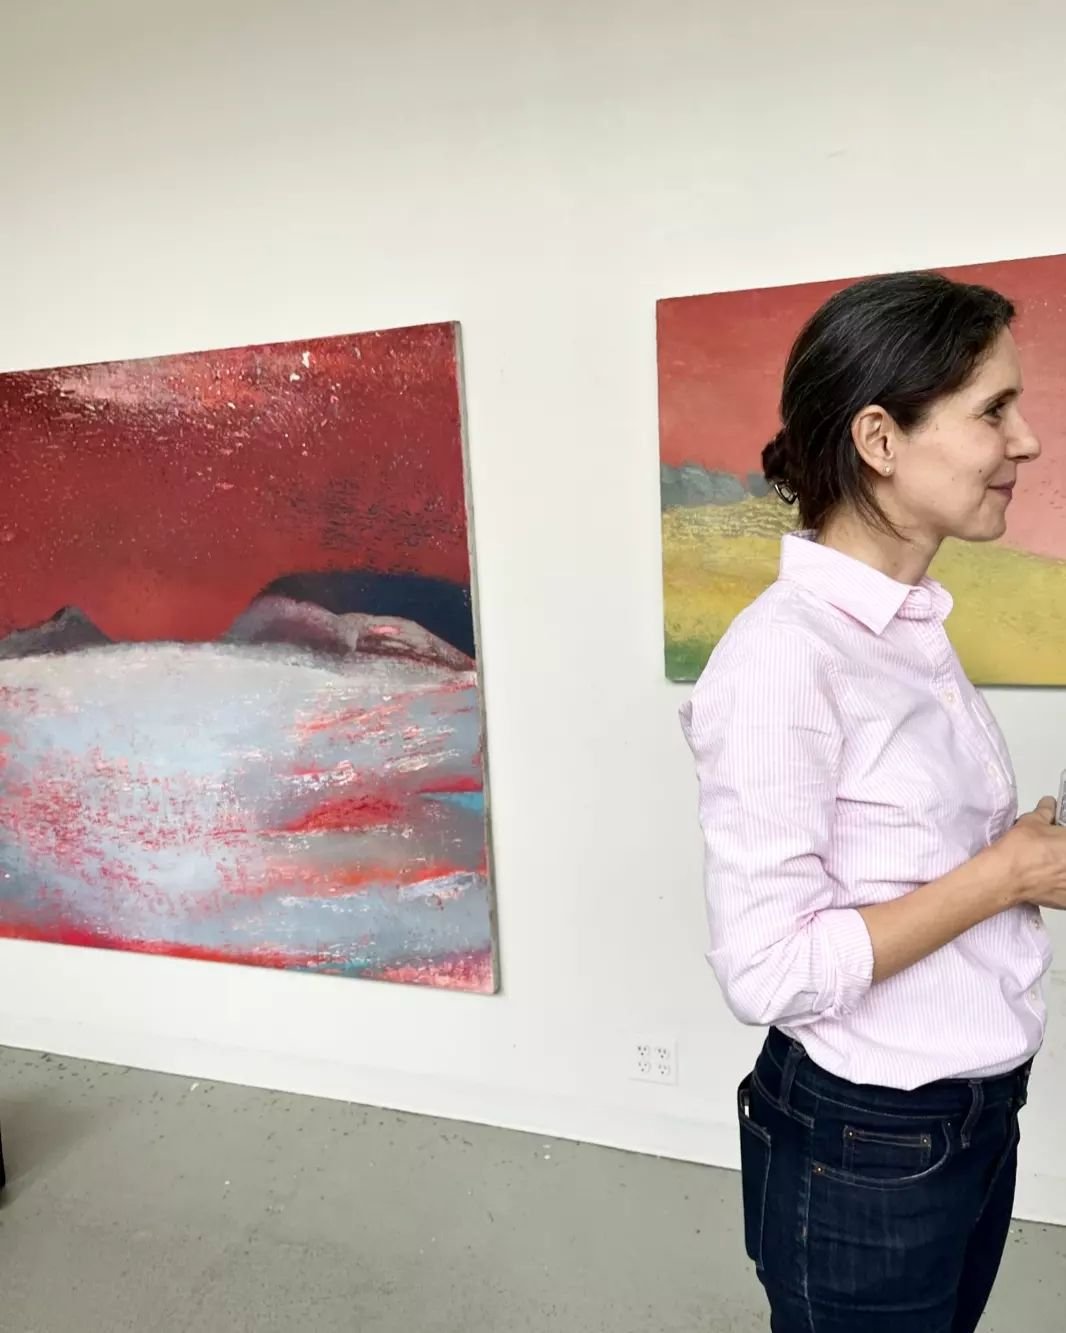 My goodness, what a weekend! Thank you all for coming out to #licartsopen and all of your support (virtual included!). Loved seeing old friends and meeting new ones! 🙏
.
.
.
#largepaintings #contemporarypainting #contemporarylandscapepainting #women